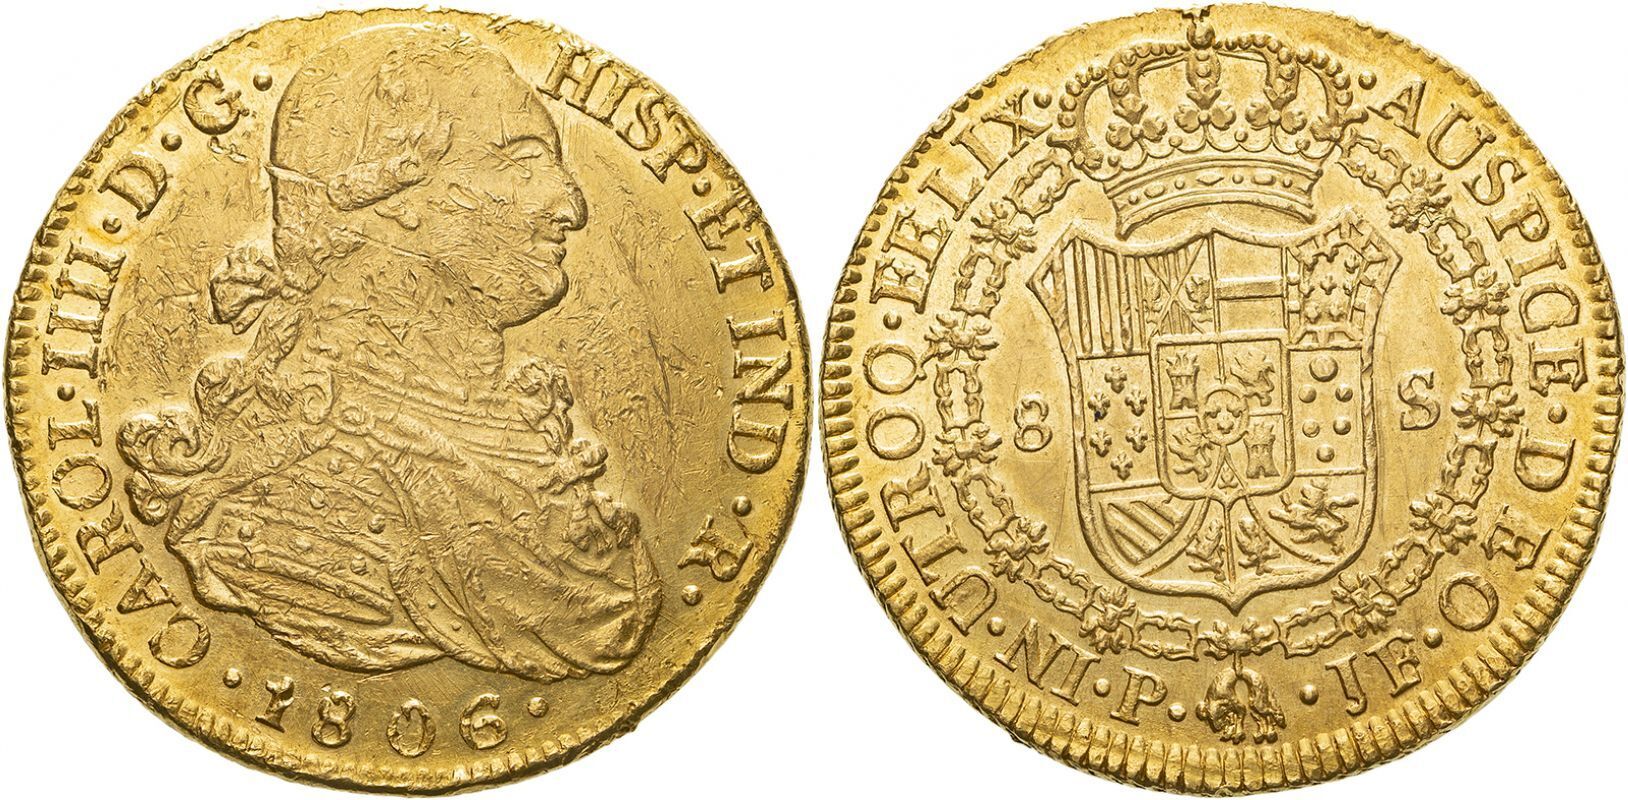 Lot 14: Colombia Charles IV 1806 P-JF Gold 8 Escudos About extremely fine (AGW=0.7616 oz.)